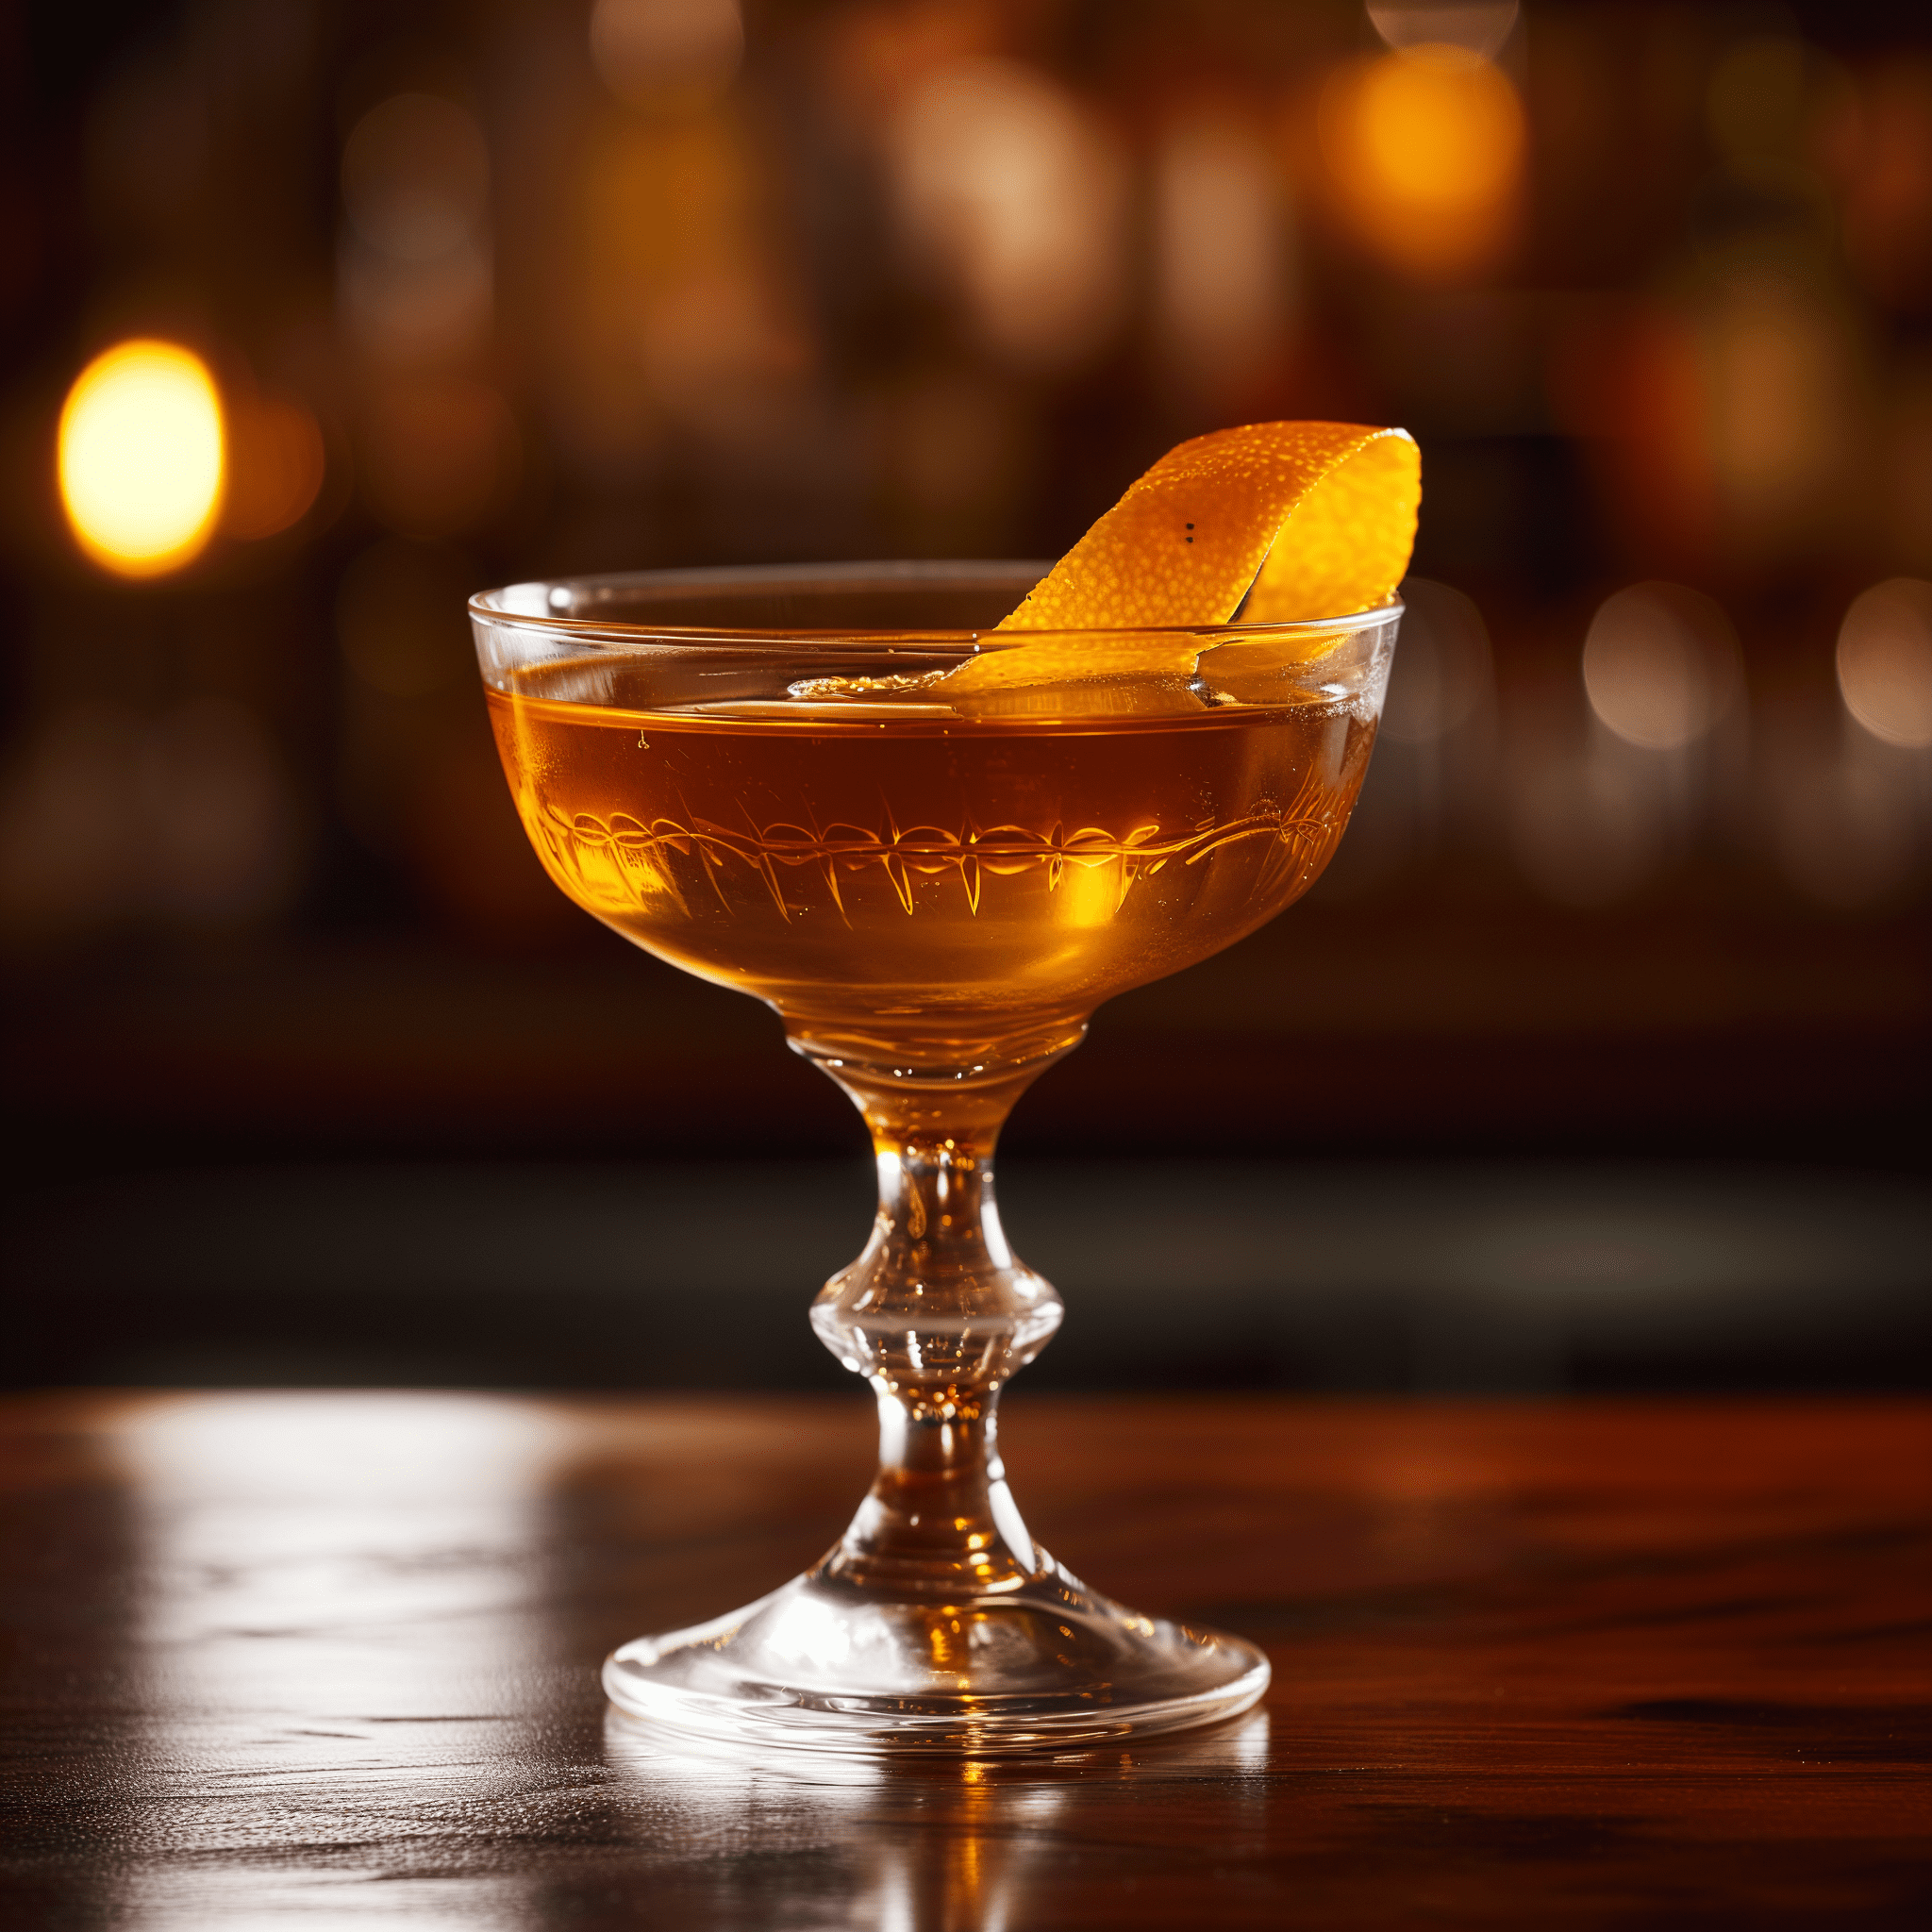 The Ampersand cocktail offers a rich and velvety taste, with the warmth of cognac, the botanical notes of Old Tom gin, and the sweet, herbal complexity of sweet vermouth. The orange bitters add a subtle citrusy zing, creating a well-rounded and sophisticated flavor profile.